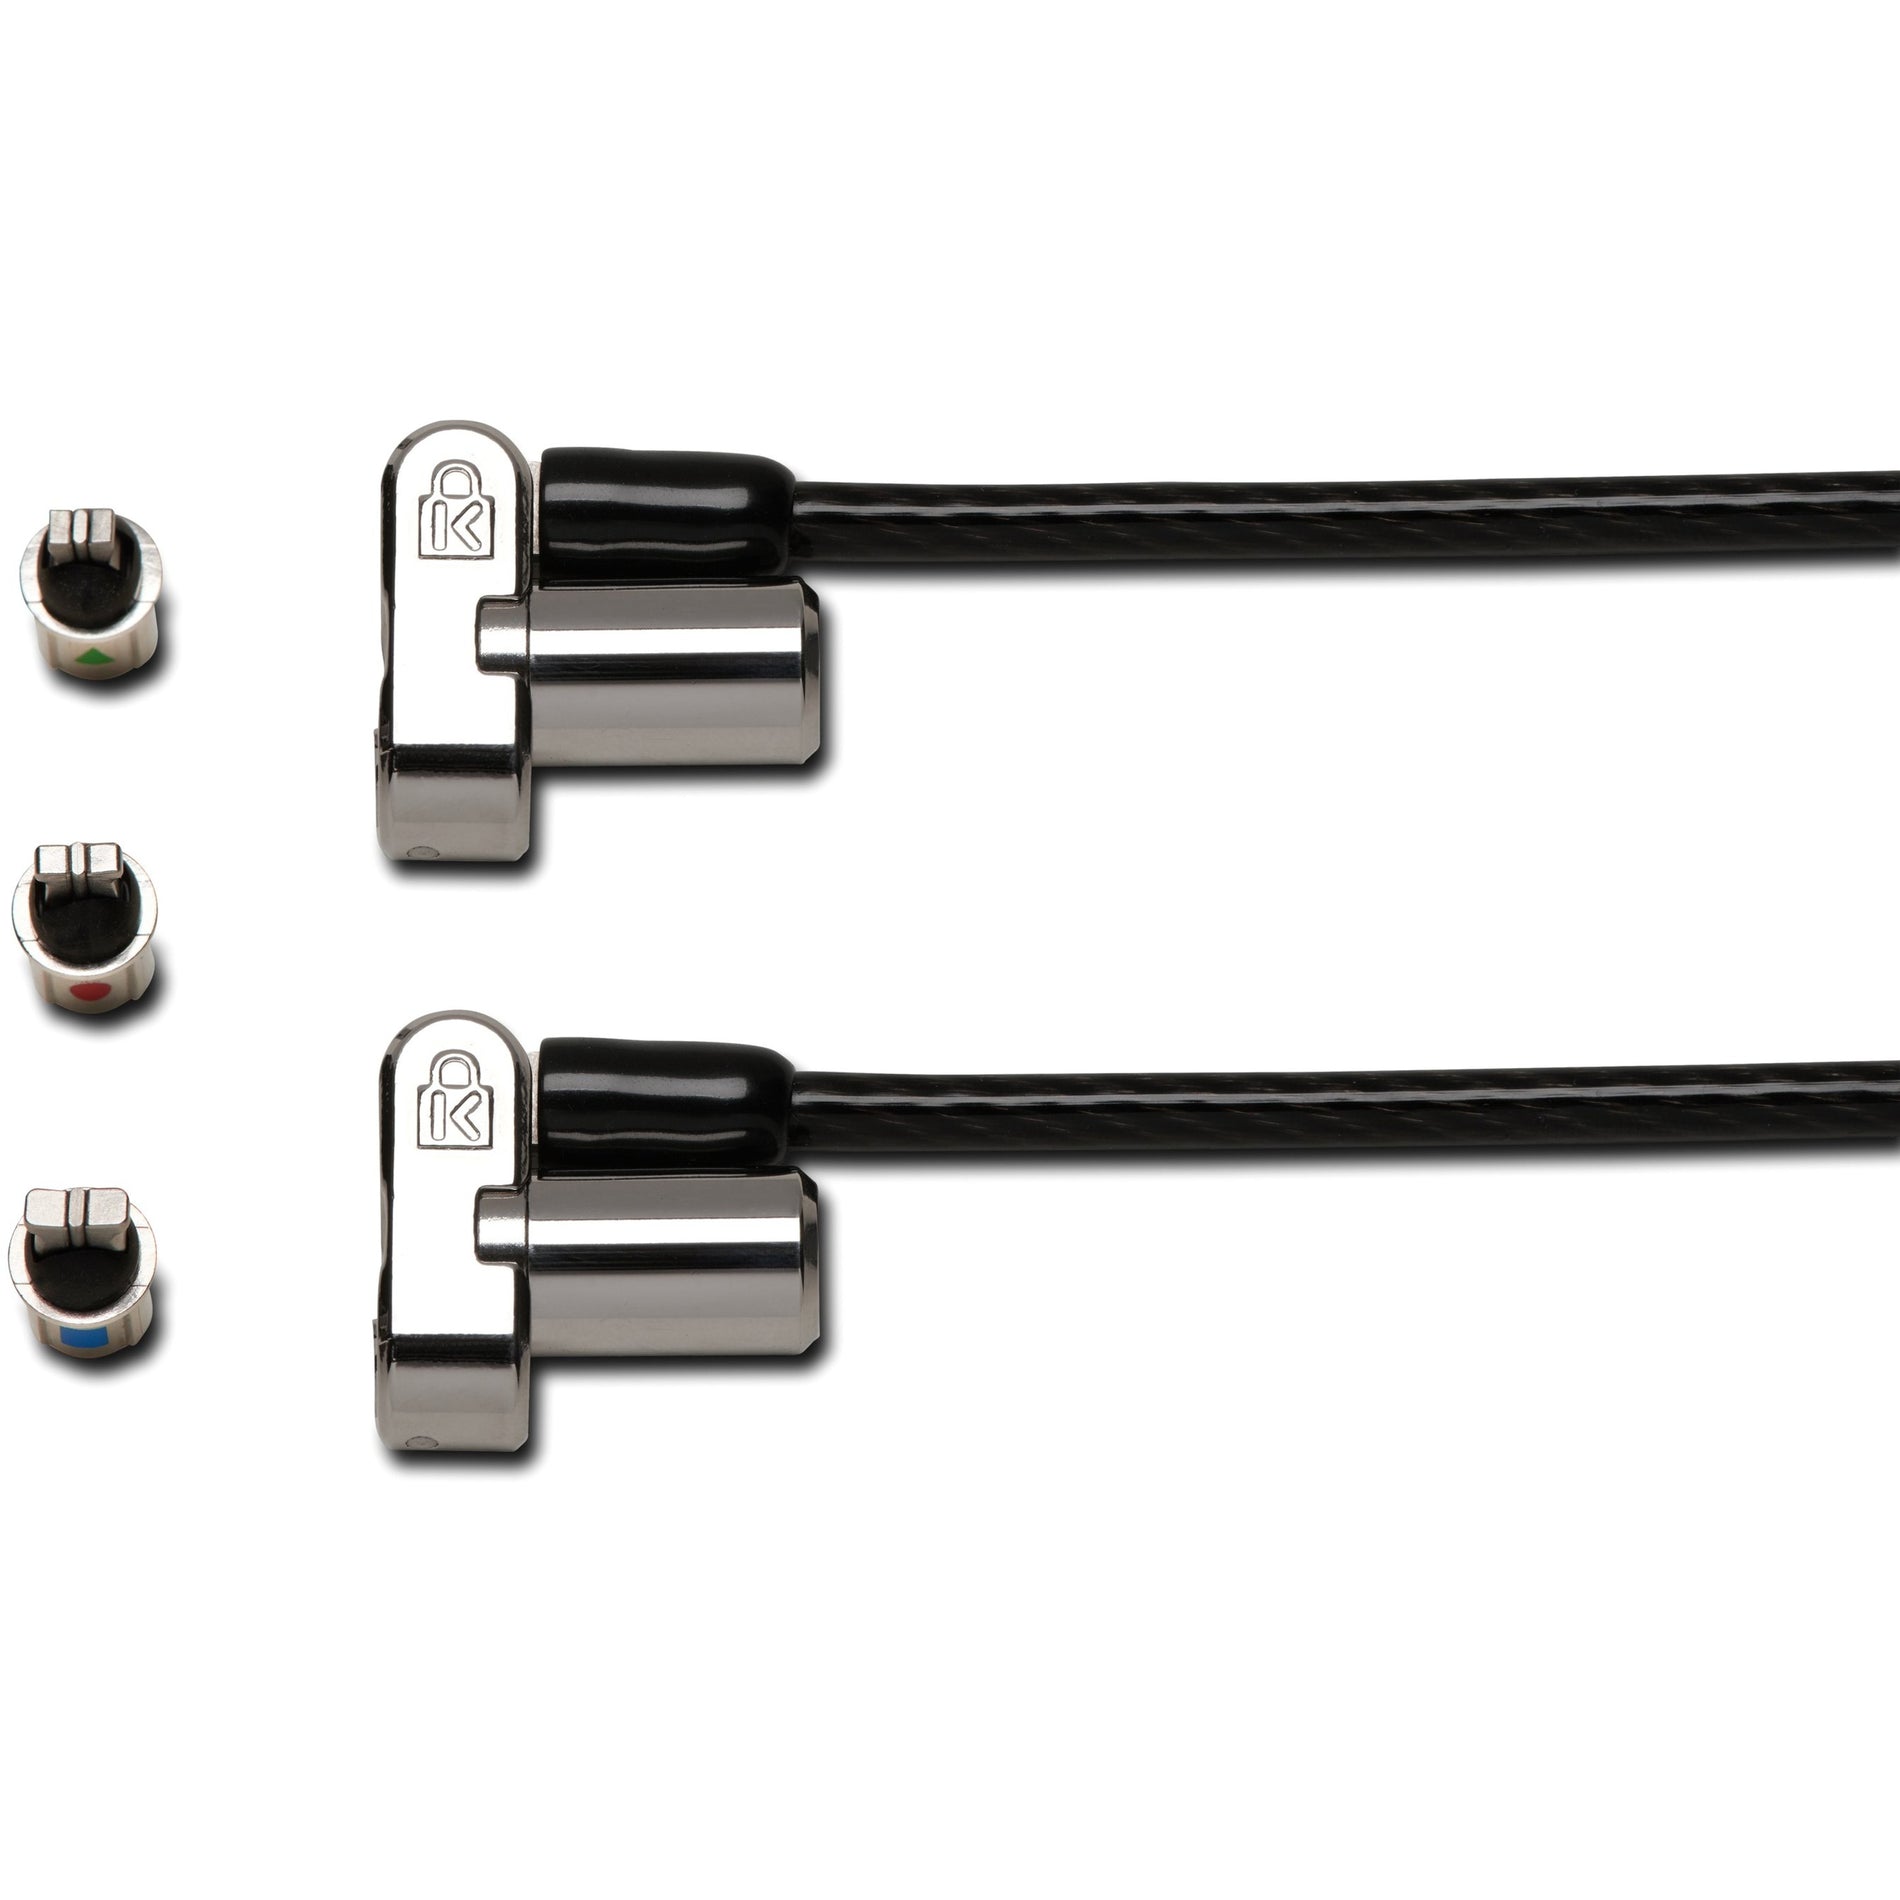 Kensington K63380WW Universal 3-in-1 Keyed Cable Lock - Twin Lockheads, Keyed Different, 5.91 ft Cable Length